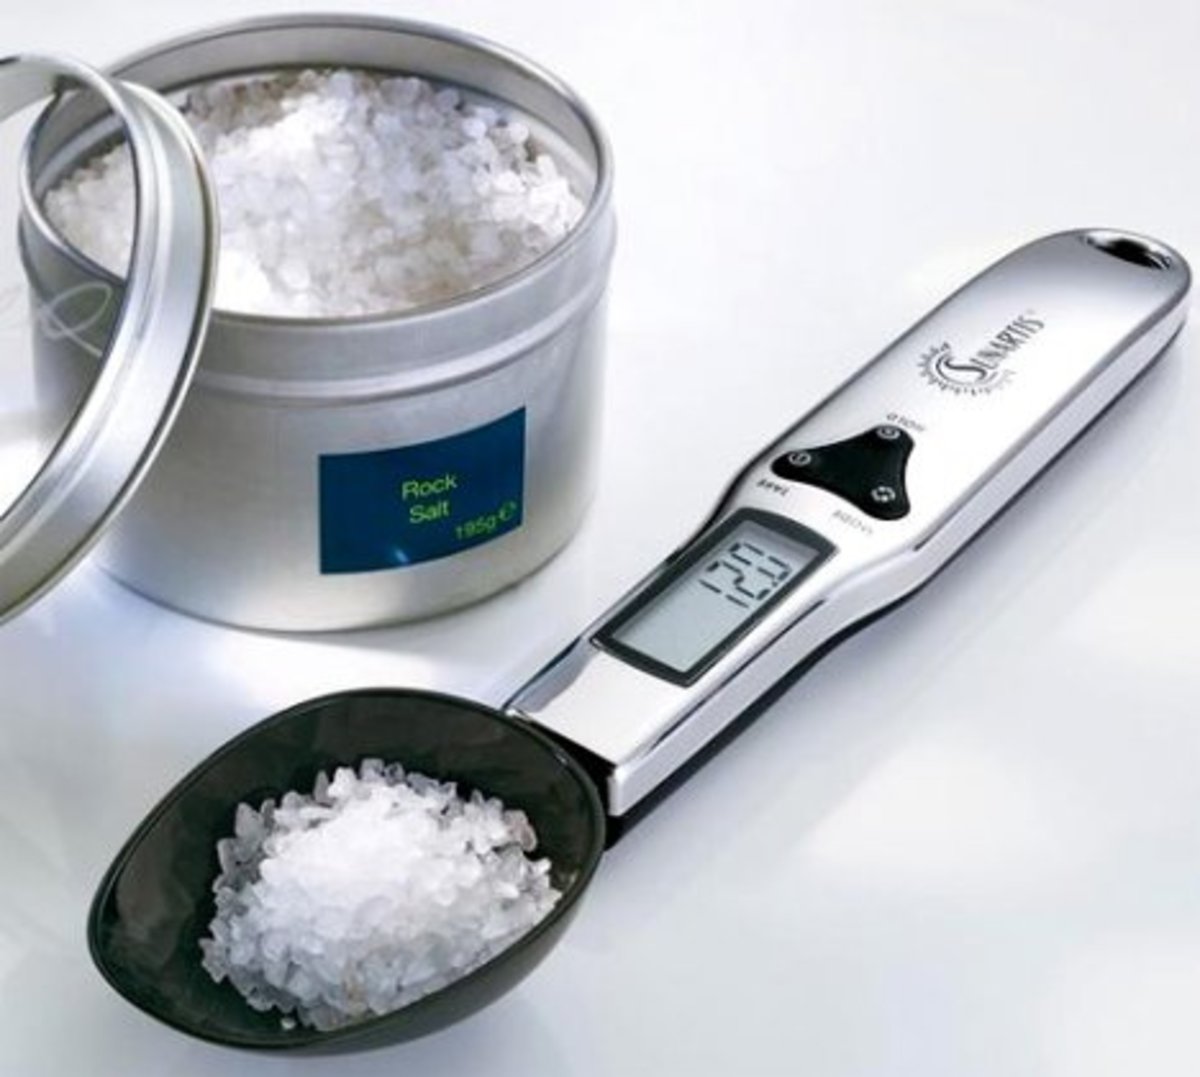 This modern spoon/scale measures volume vs weight in the blink of an eye. It offers a LCD viewing screen built into the handle. This one runs about $24 at ThinkGeek.com